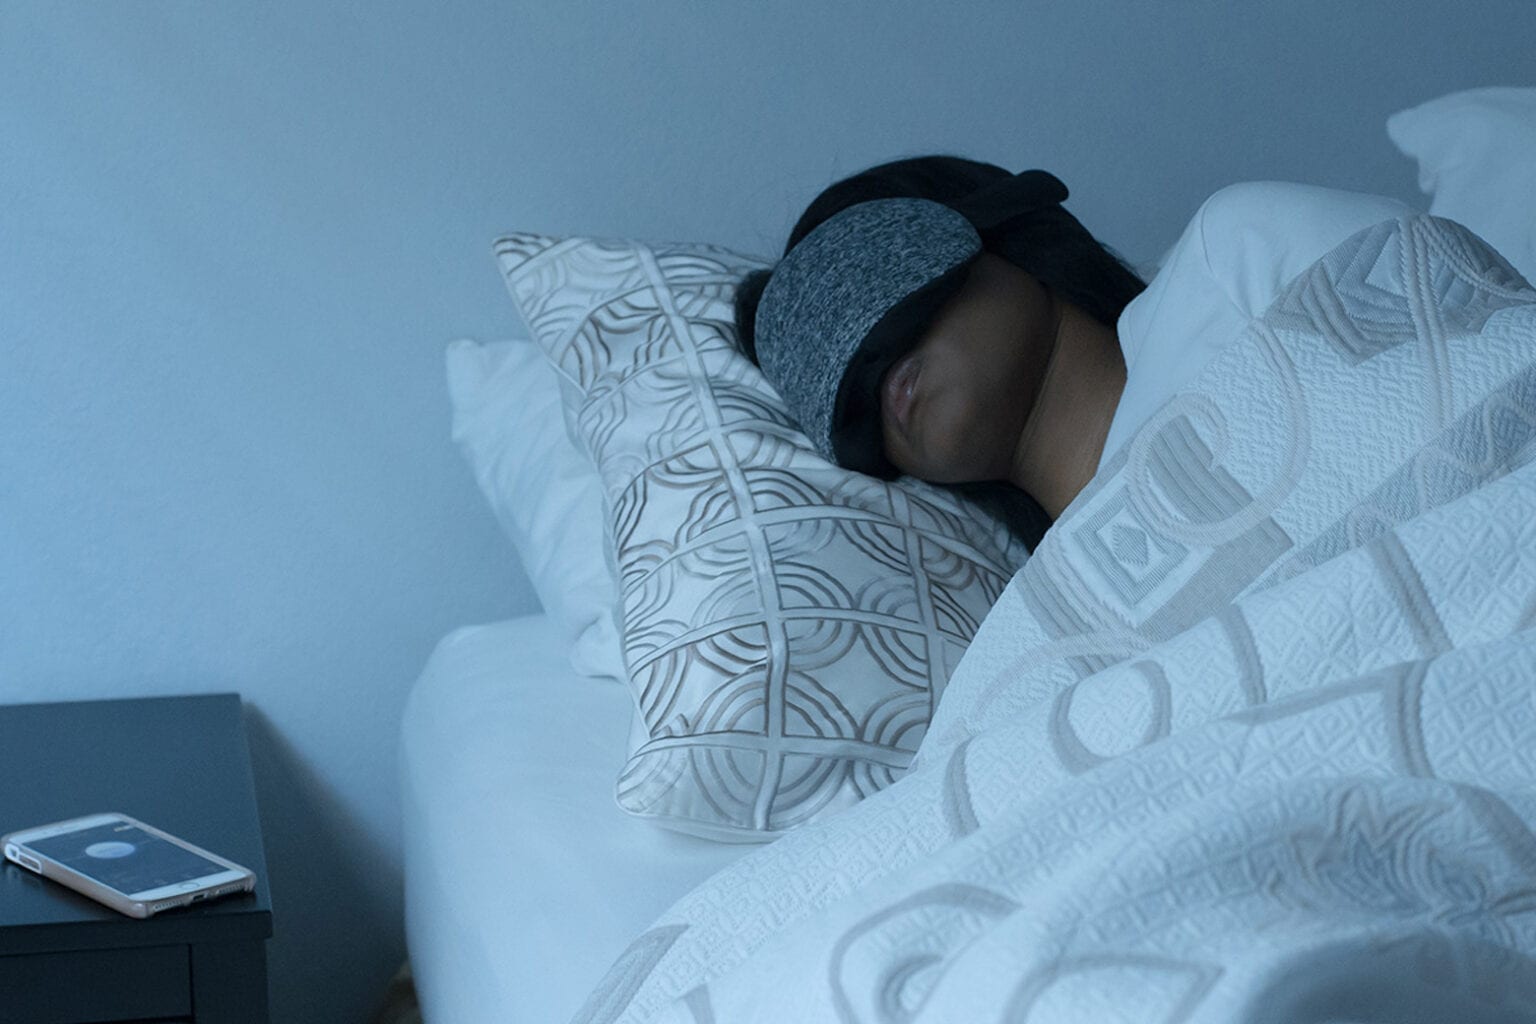 This sleep mask could help you stop snoring.